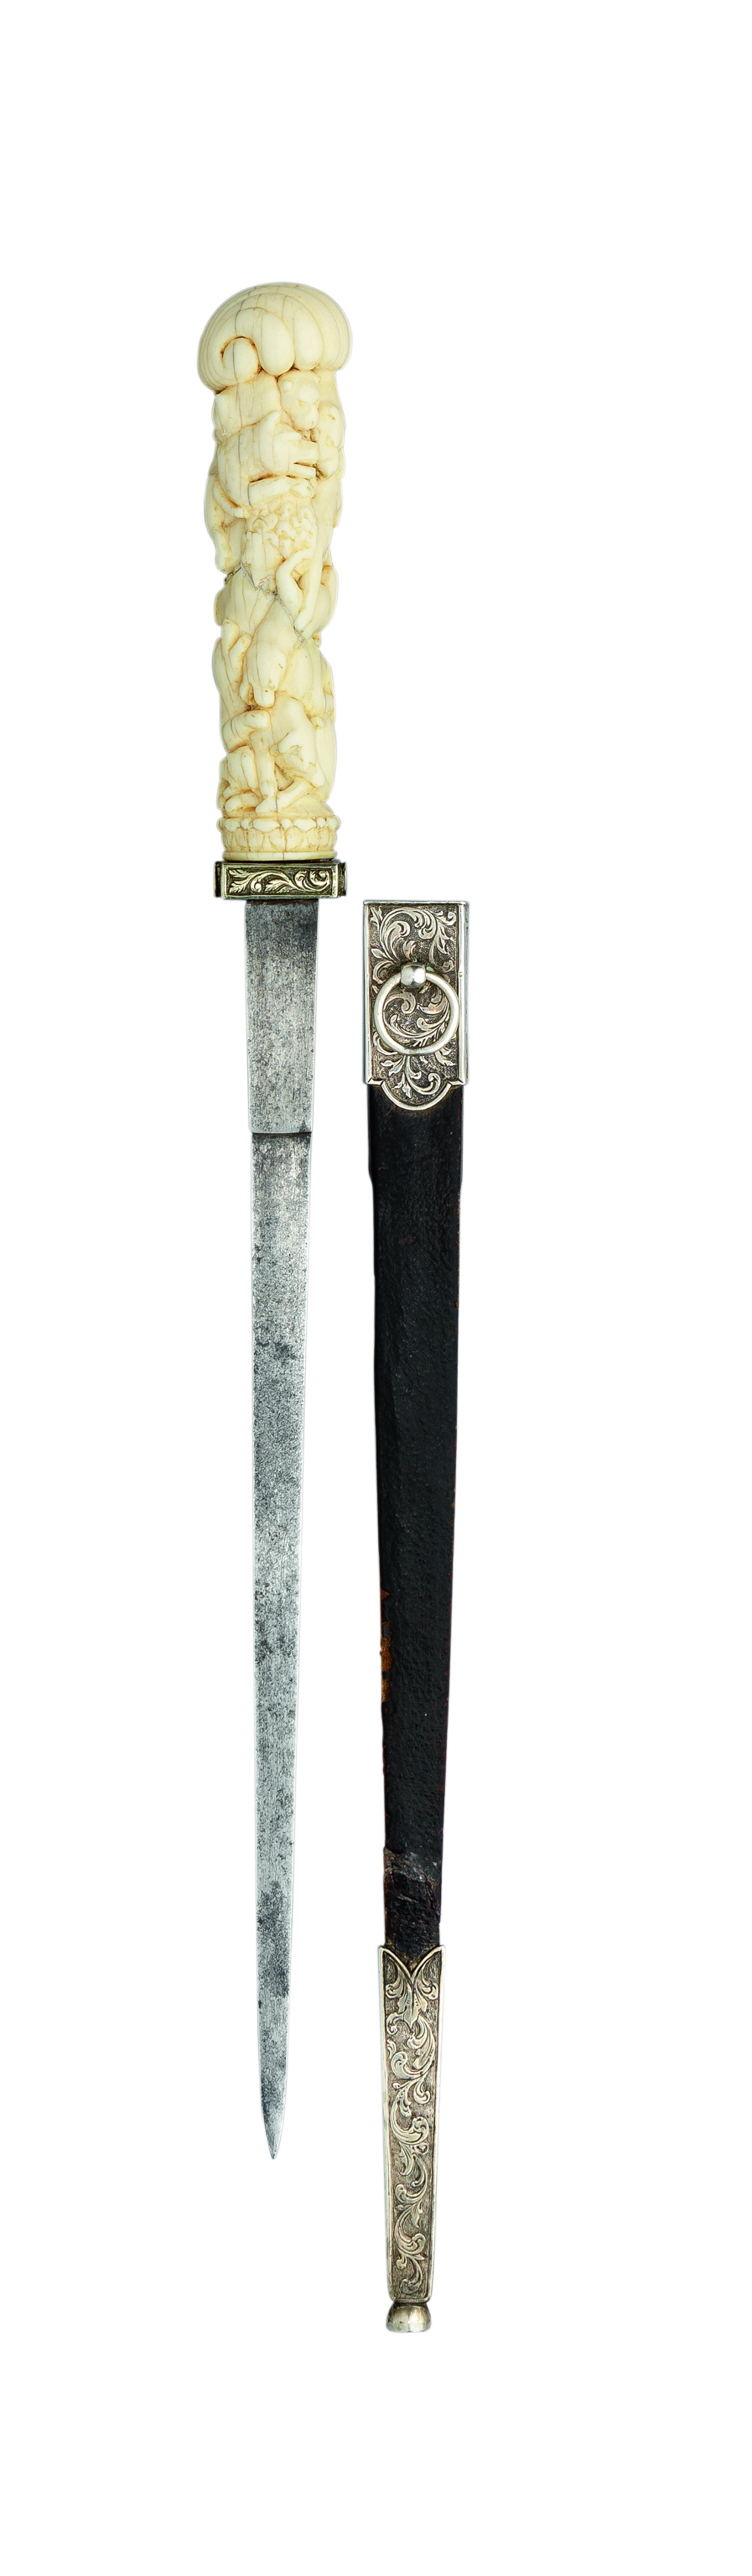 ˜A FINE SOUTH GERMAN DAGGER WITH CARVED IVORY HILT, SECOND QUARTER OF THE 18TH CENTURY